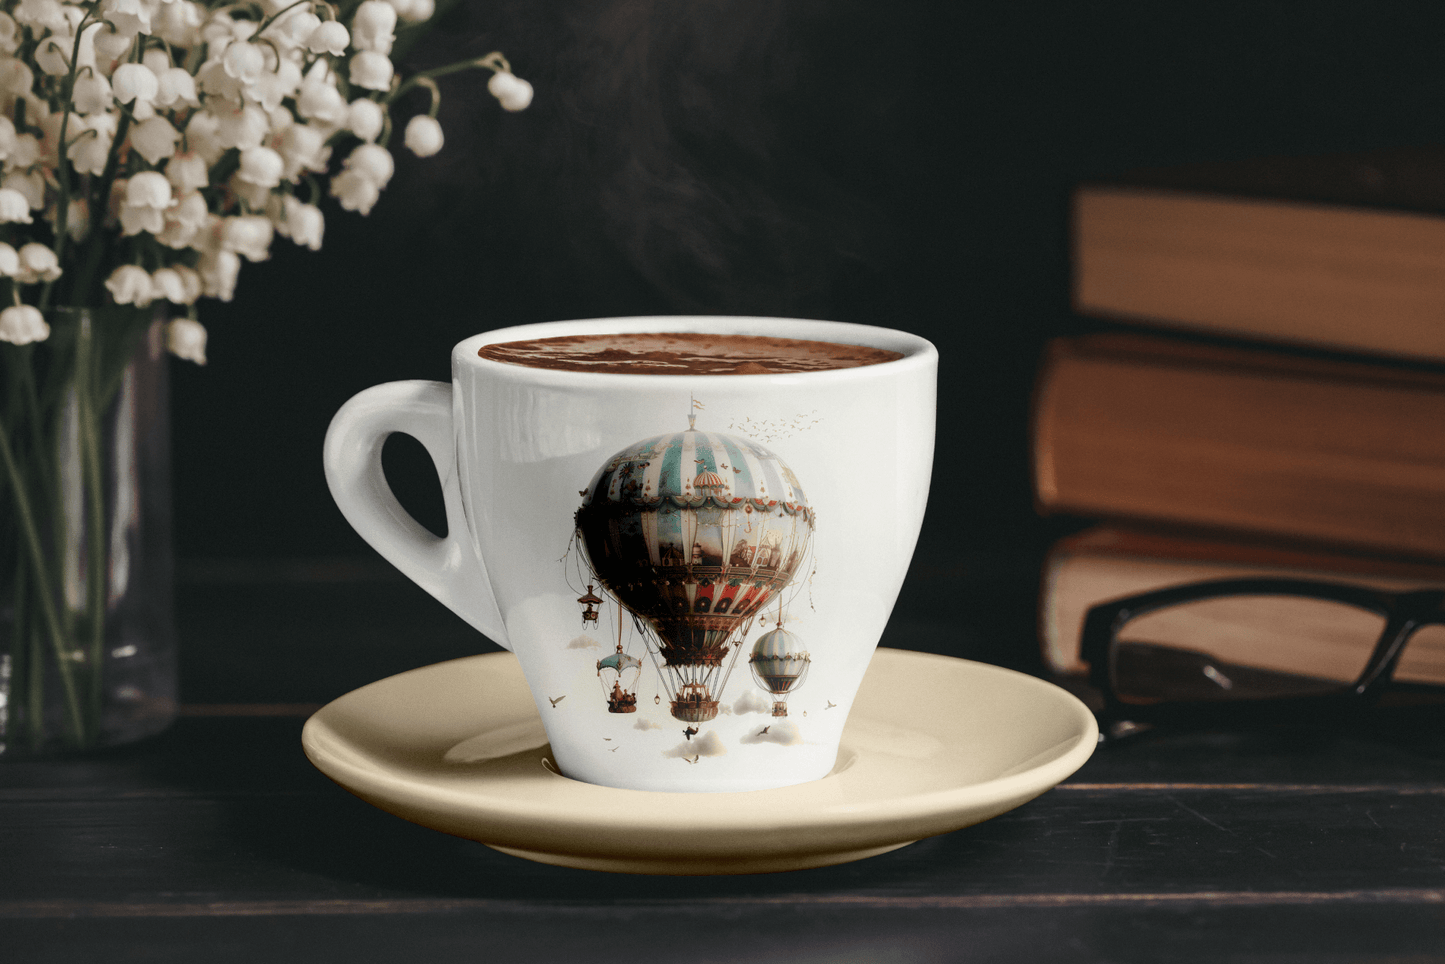 Custom porcelain coffee cup with a vintage hot air balloon design